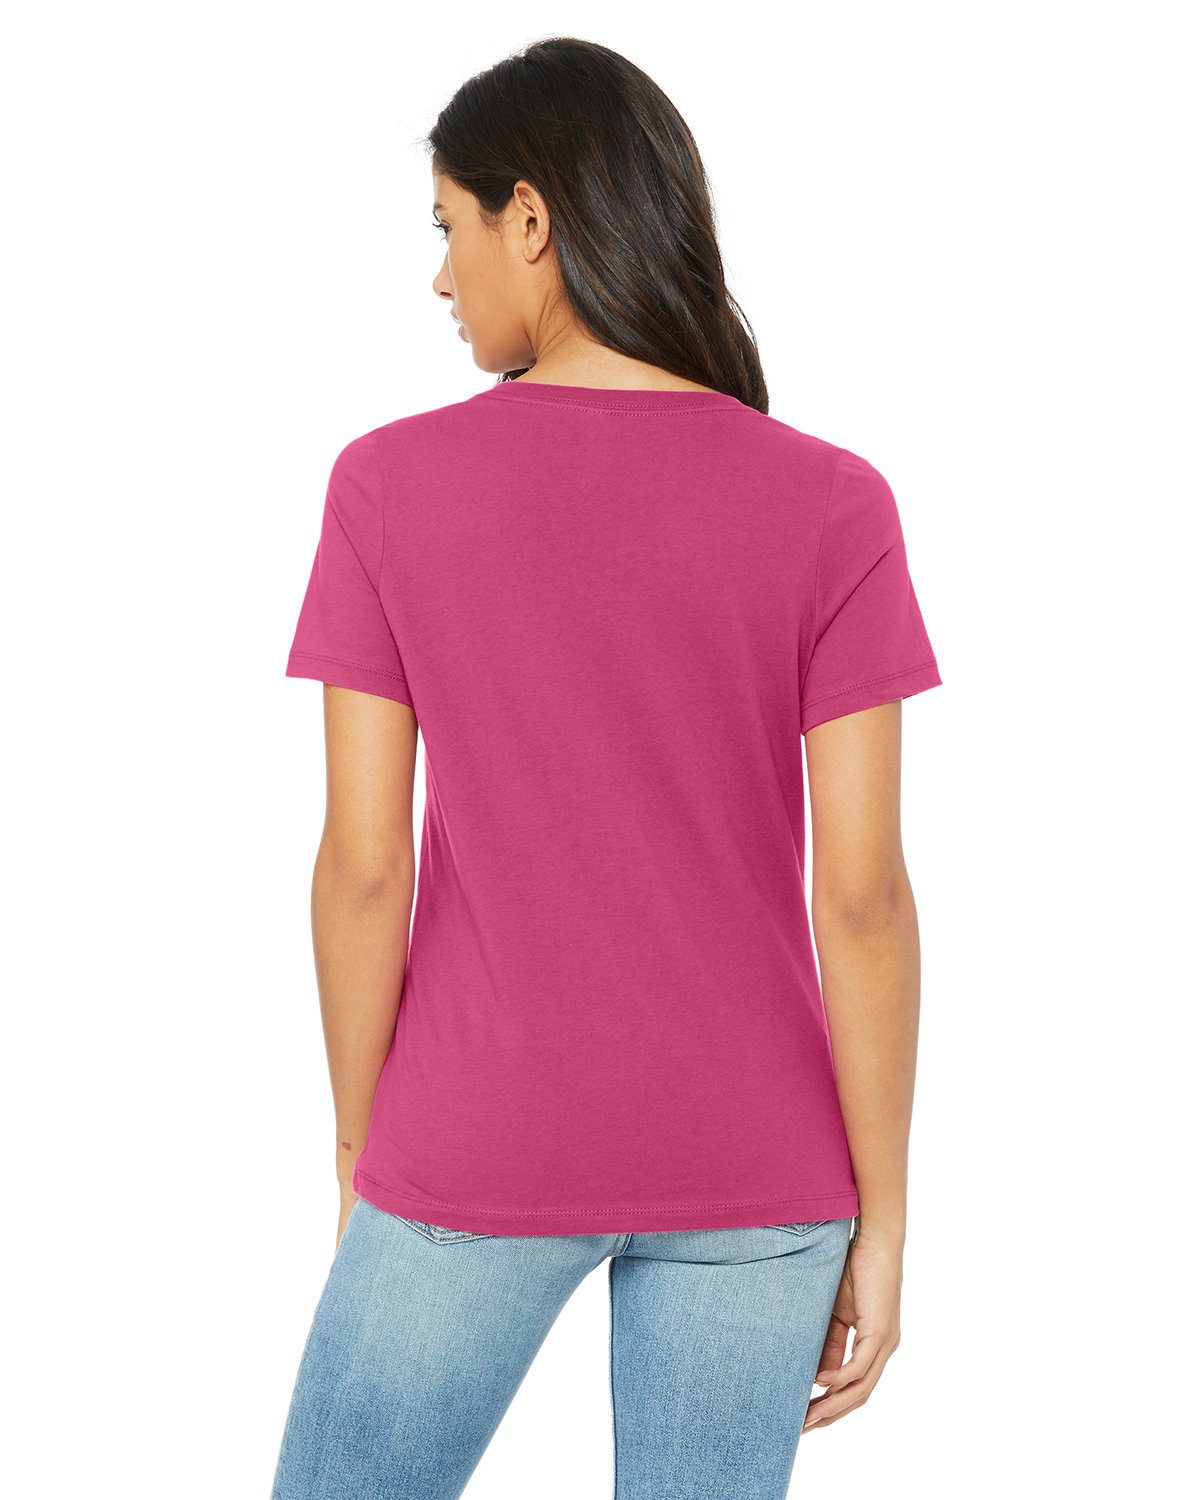 Bella + Canvas Ladies' Relaxed Jersey V-Neck T-Shirt #6405 Berry Back